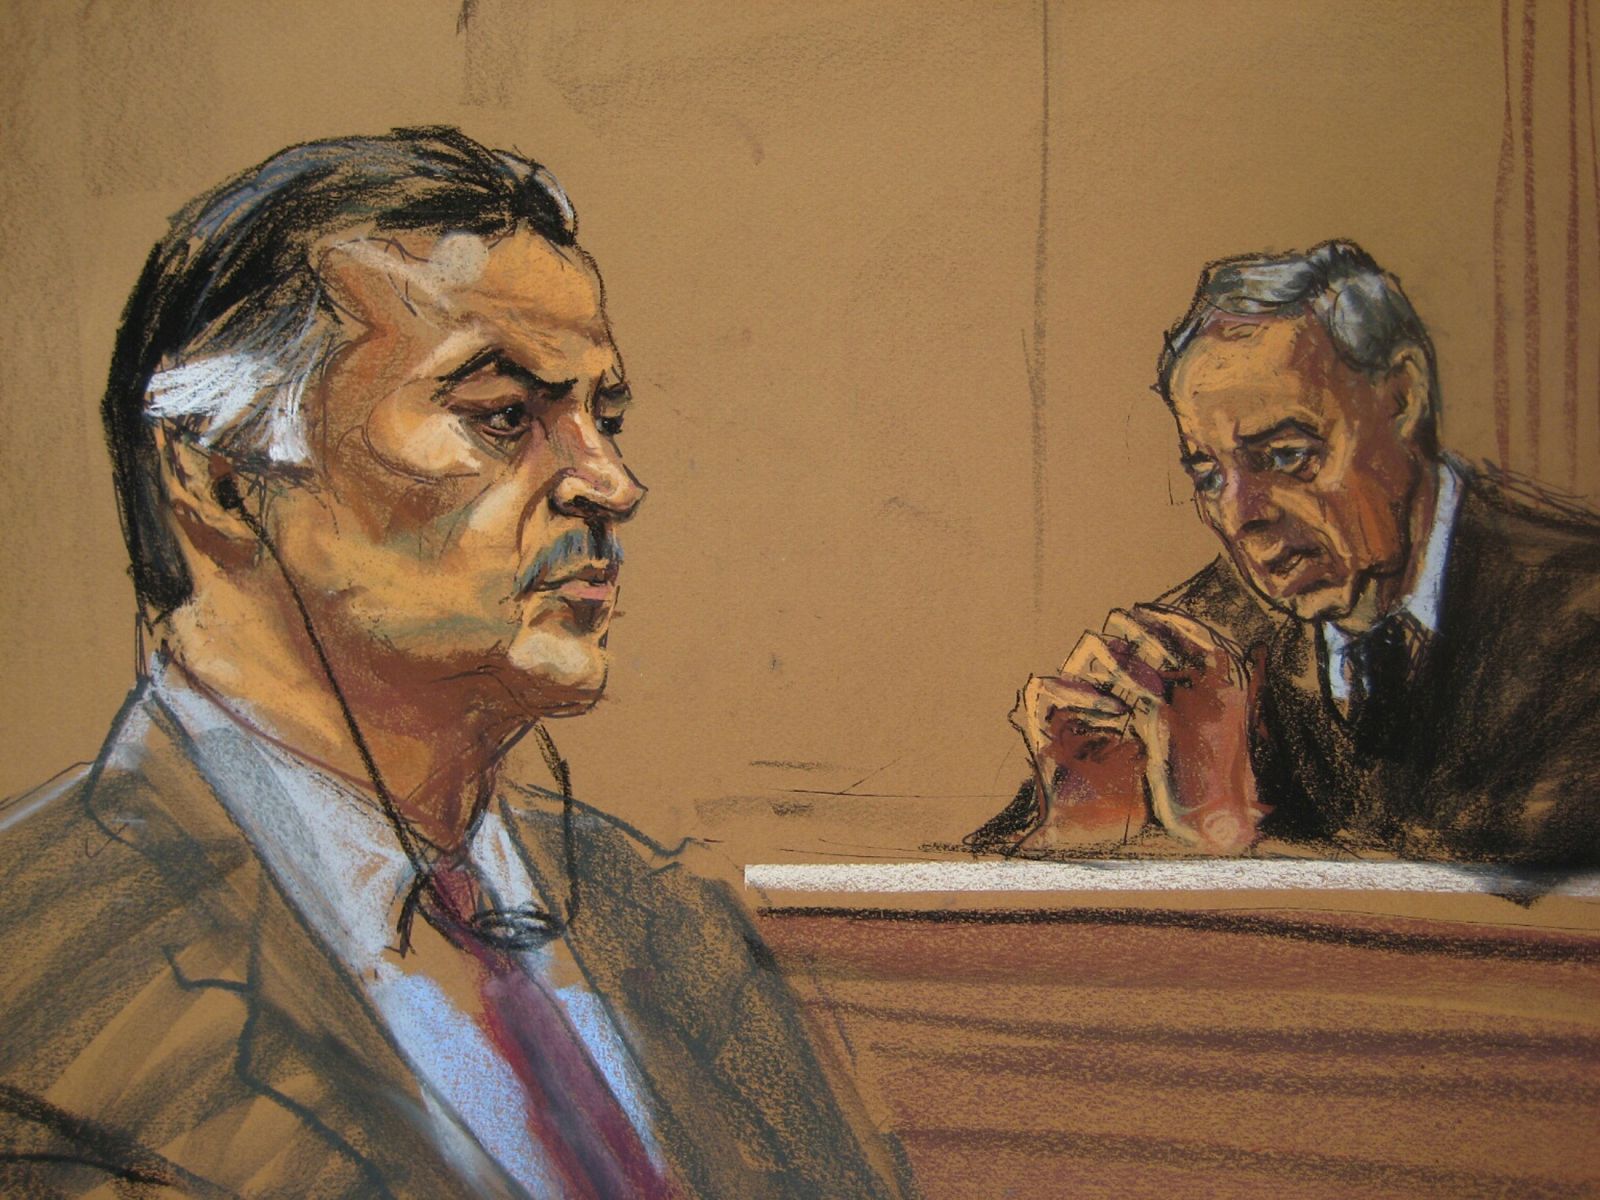 Former Guatemalan President Alfonso Portillo is seen in a courtroom drawing in U.S. District Court in New York